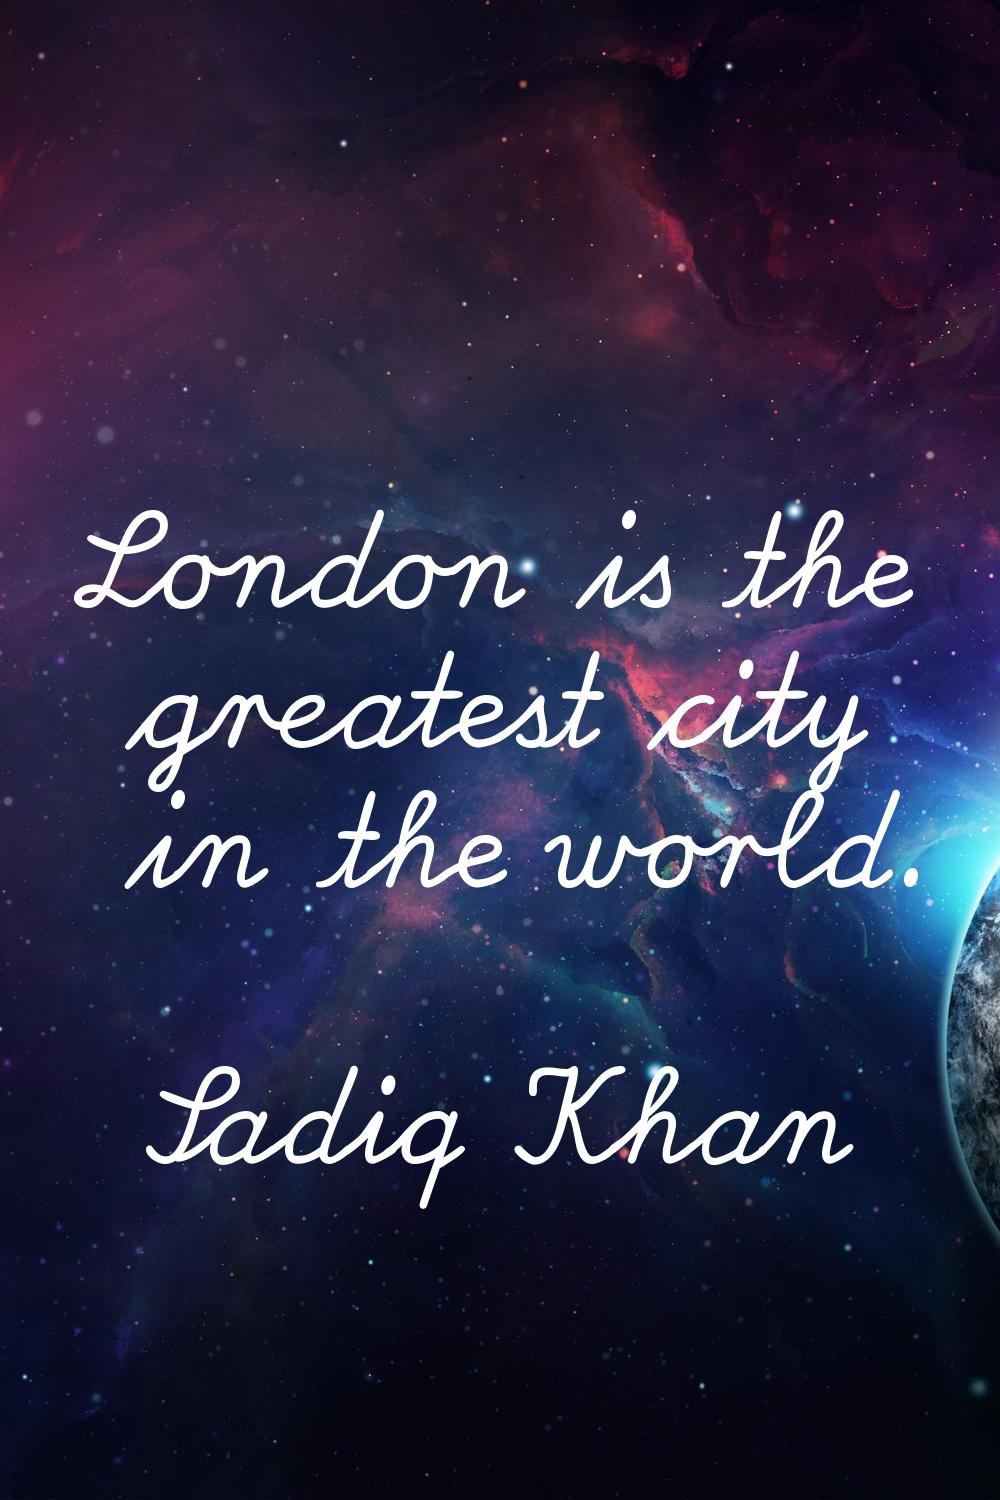 London is the greatest city in the world.